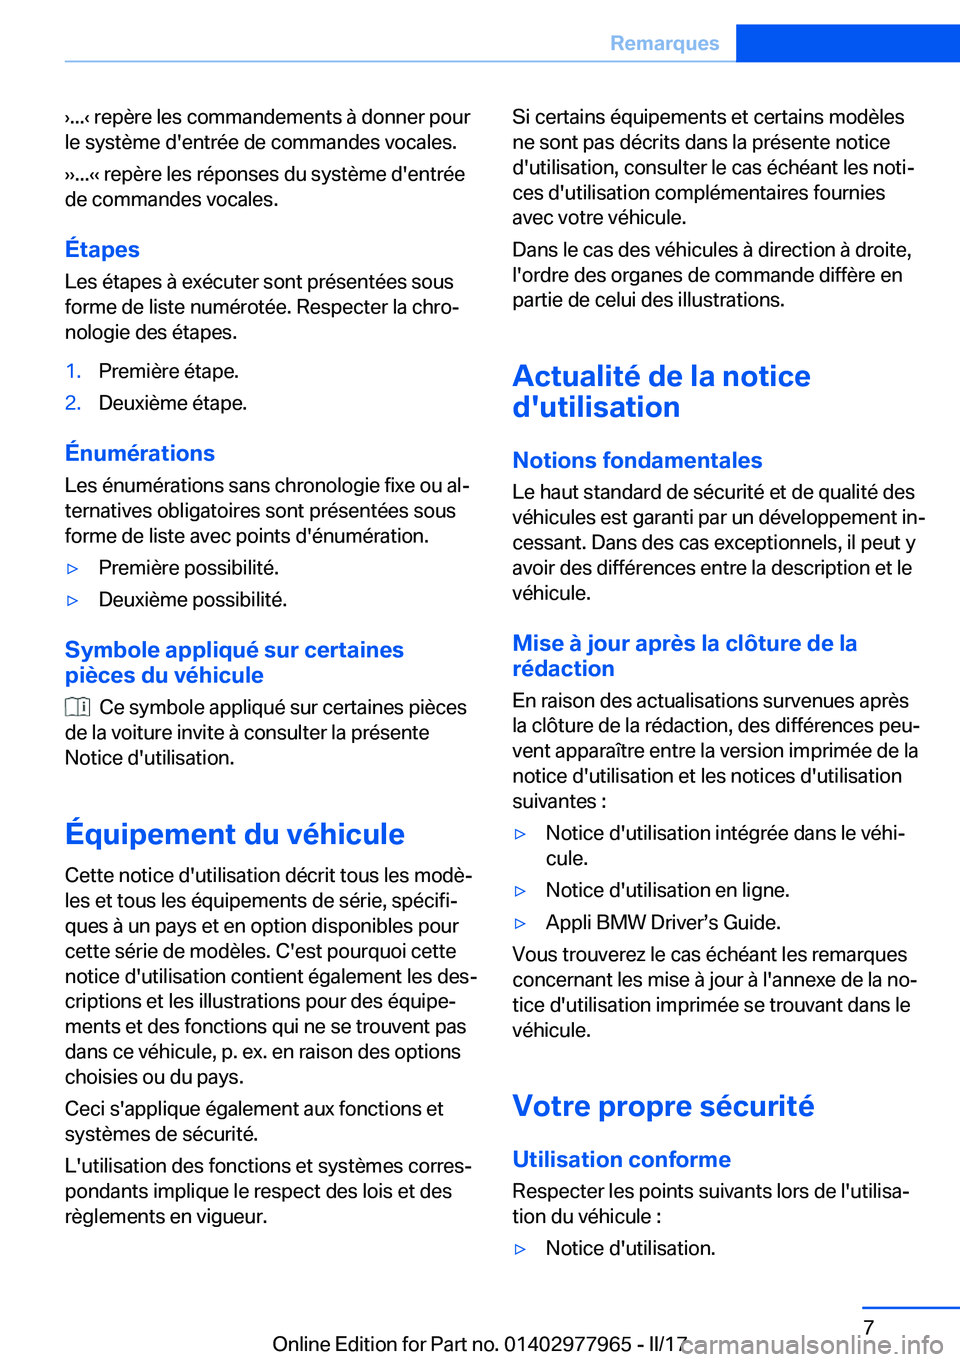 BMW 3 SERIES 2017  Notices Demploi (in French) 